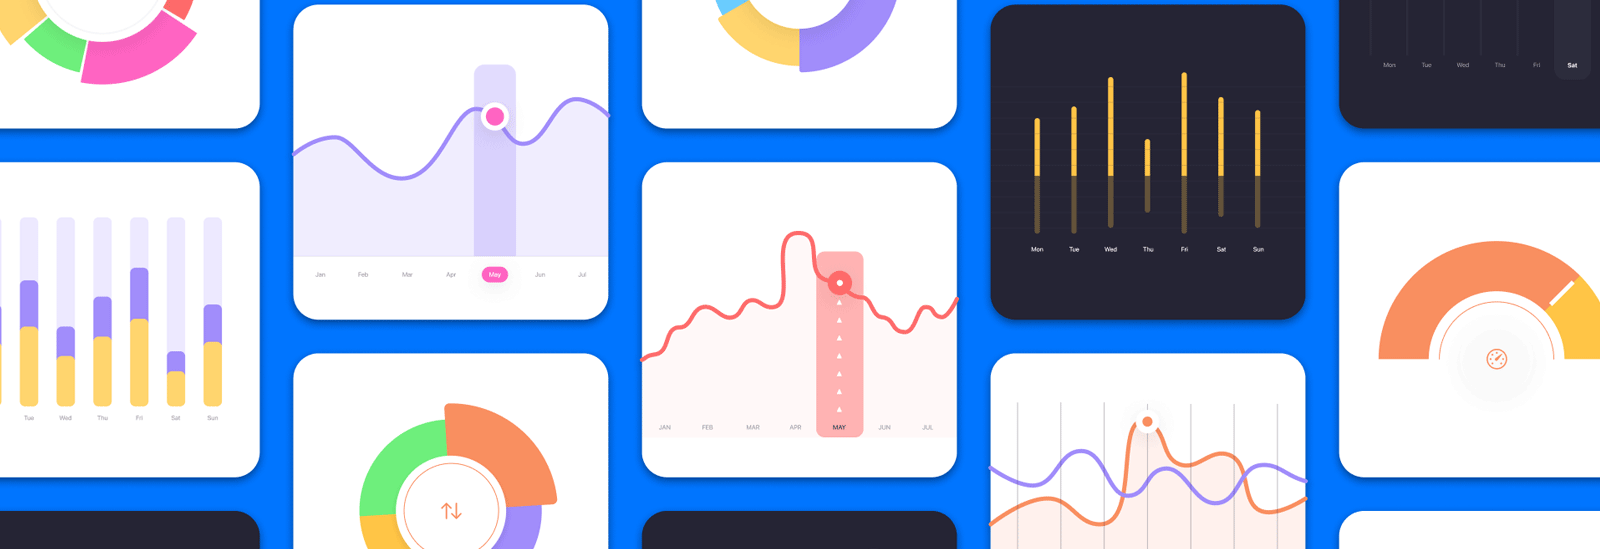 12 Common Mistakes to Avoid When Designing a Dashboard